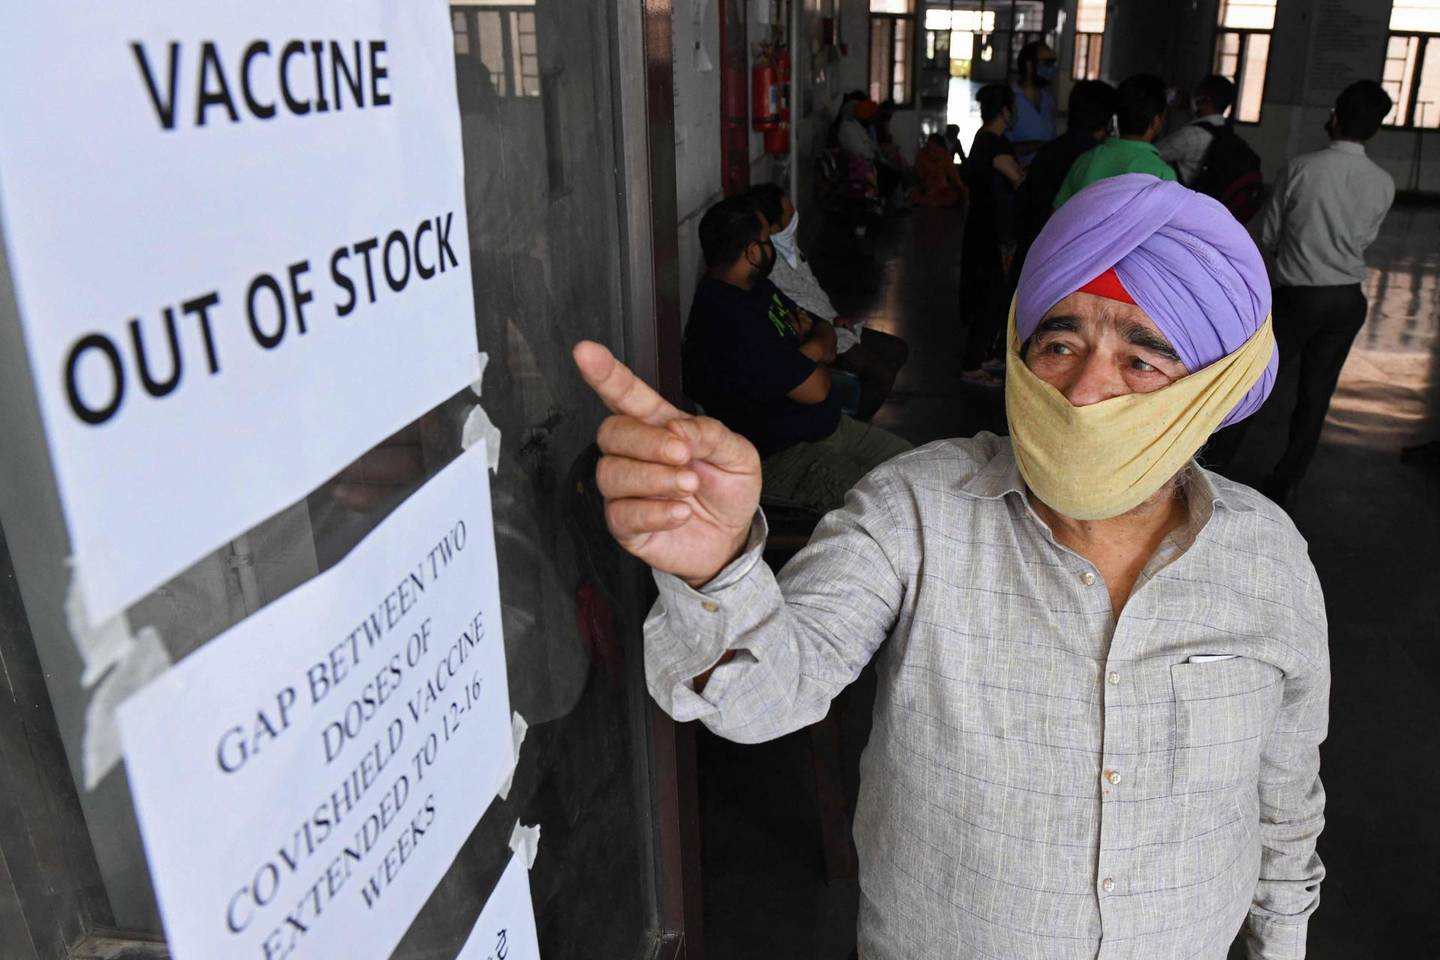 A man gestures to notices displayed in a civil hospital indicating about the Covid-19 coronavirus vaccine being out of stock in Amritsar on May 17, 2021. / AFP / Narinder NANU
